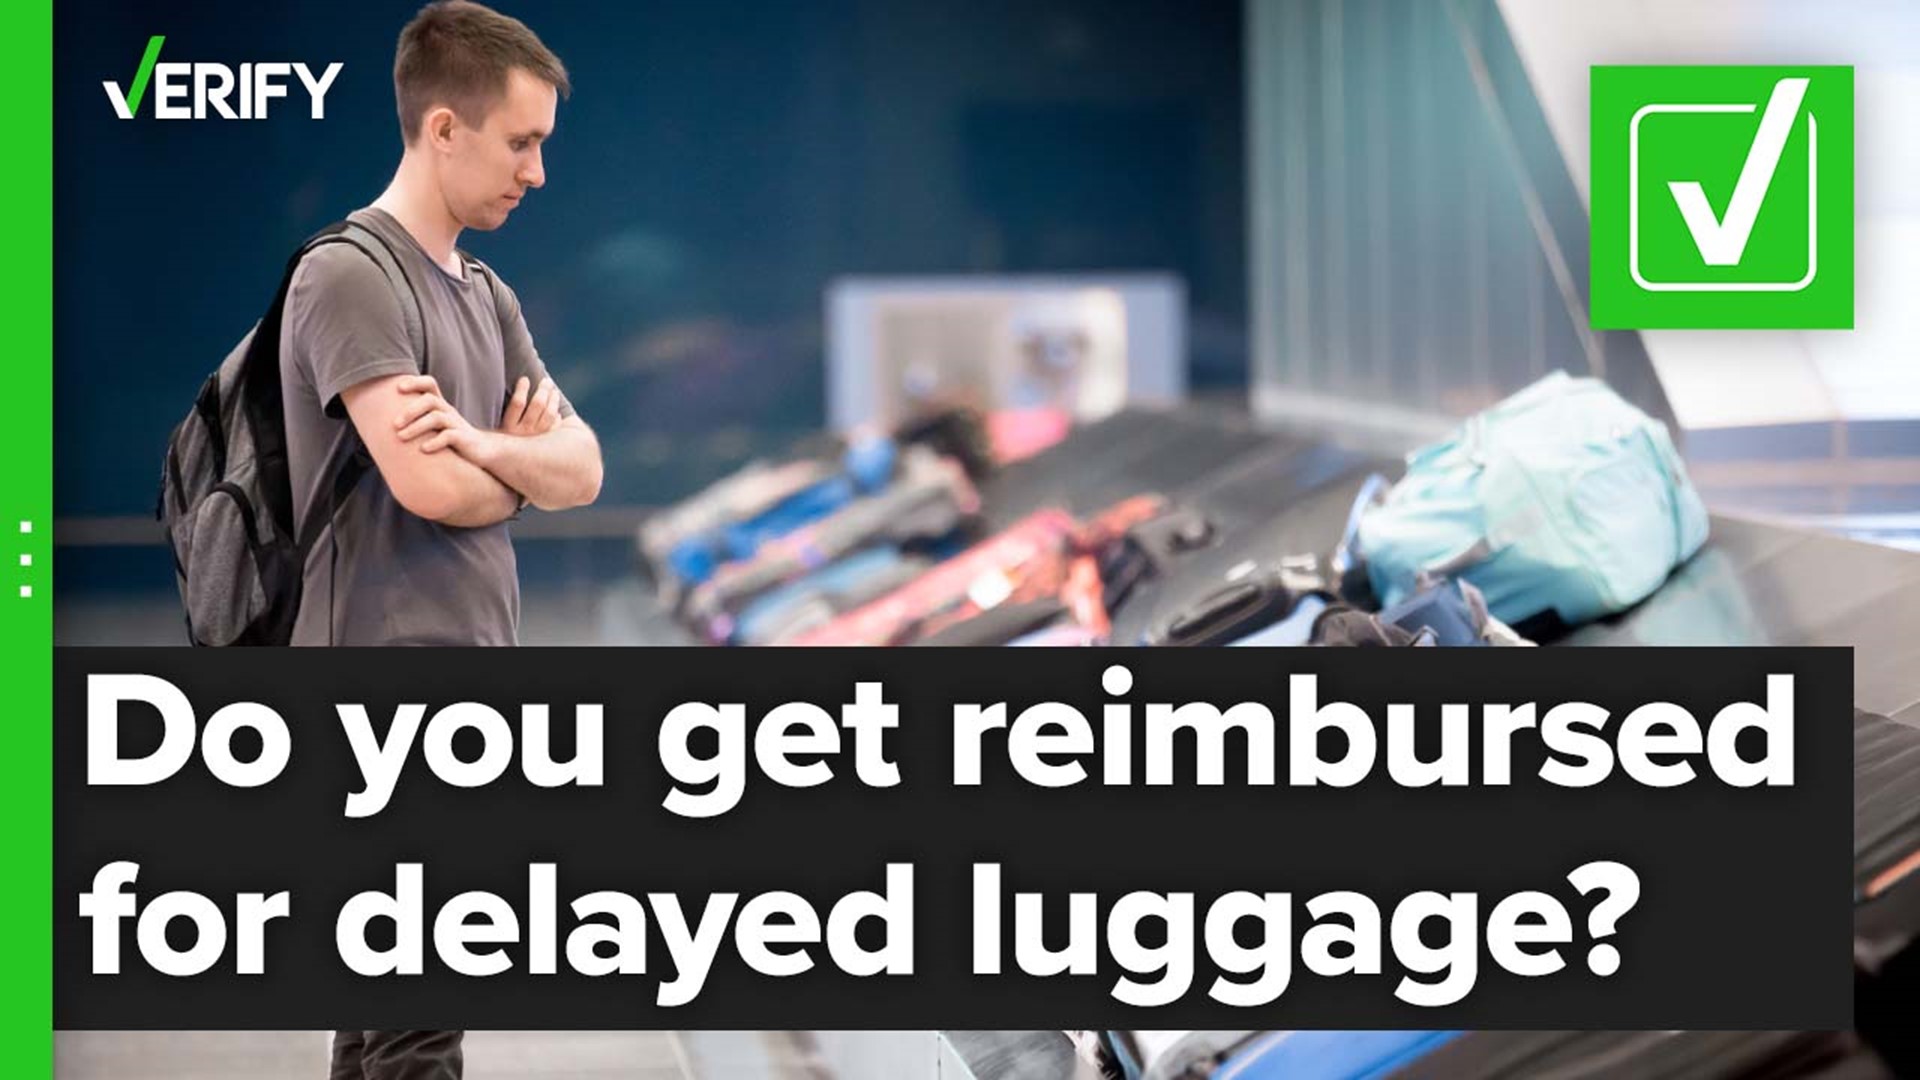 Airlines have to reimburse you for ‘reasonable’ items if your bag is lost or delayed